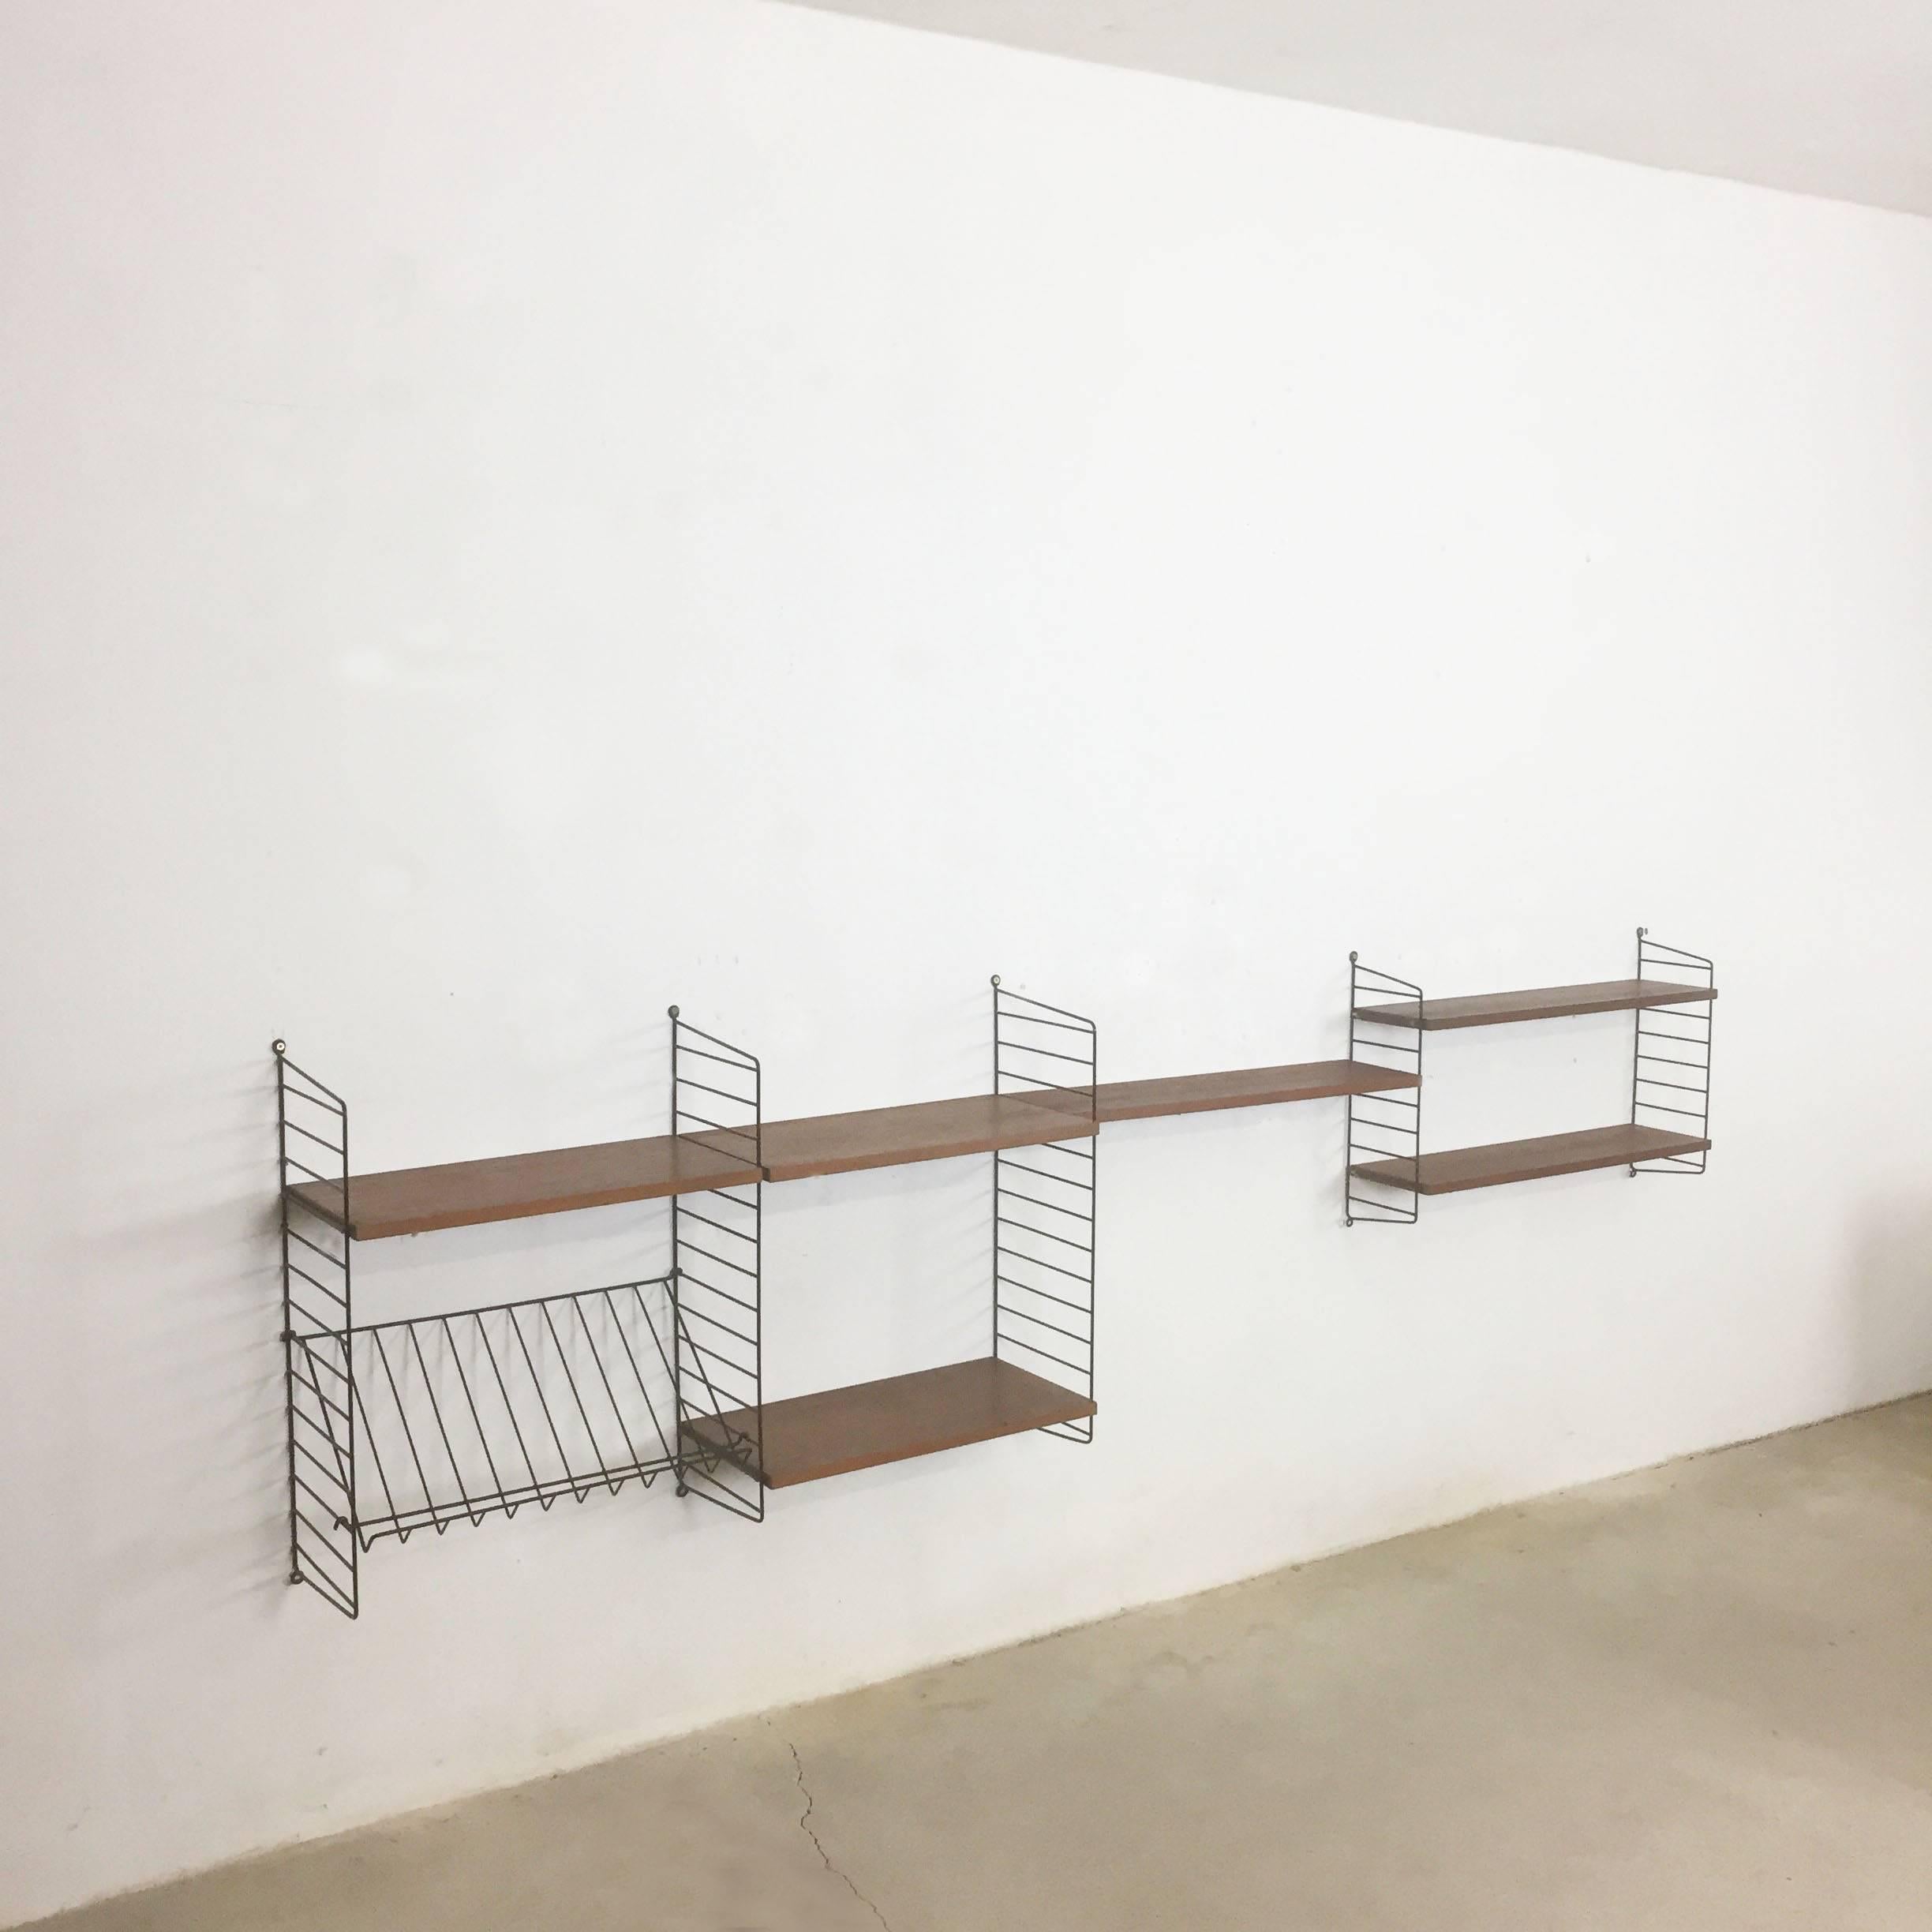 String Regal wall unit

Made in Sweden

Bokhyllan 'The Ladder Shelf’

Design: Nils und Kajsa Strinning, 1949

The architect Nisse Strinning was born in 1917. From 1940 to 1947 he studied architecture in Stockholm, before he designed the